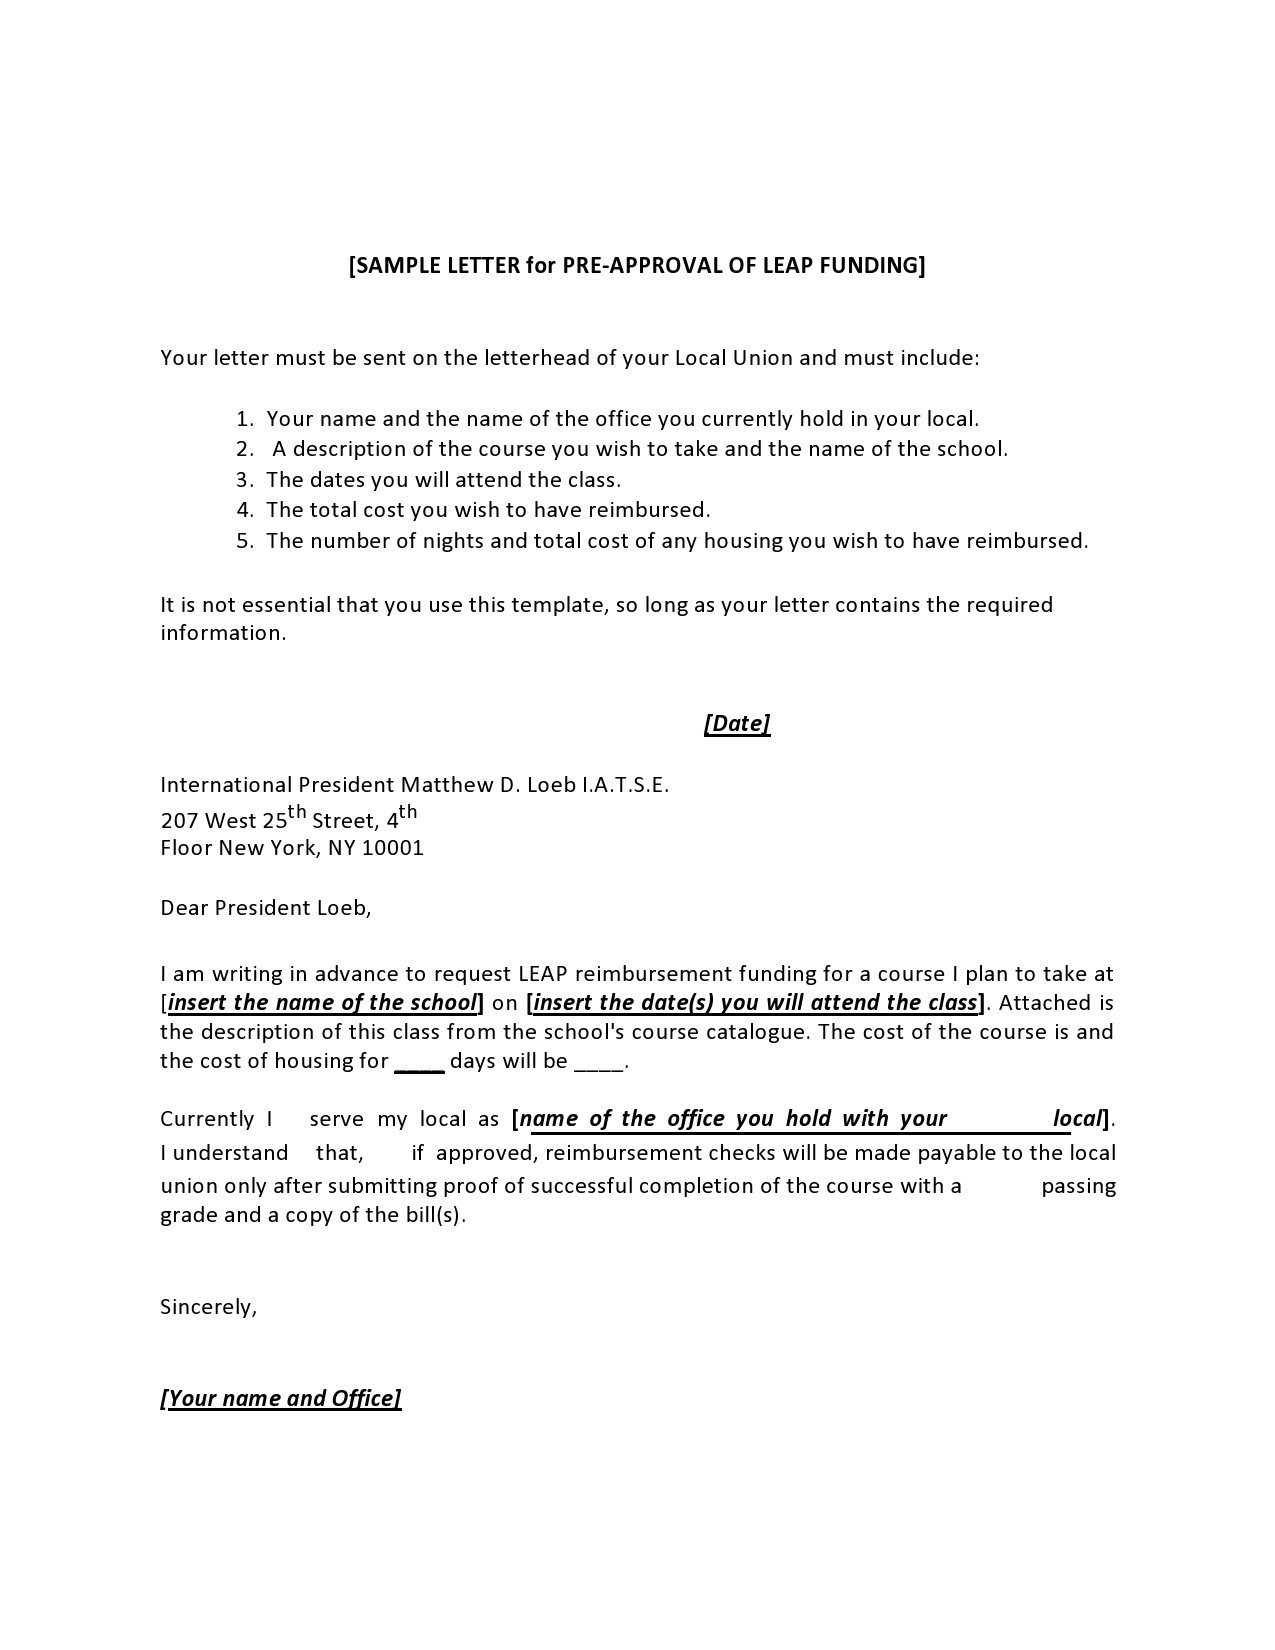 Free pre approval letter 01